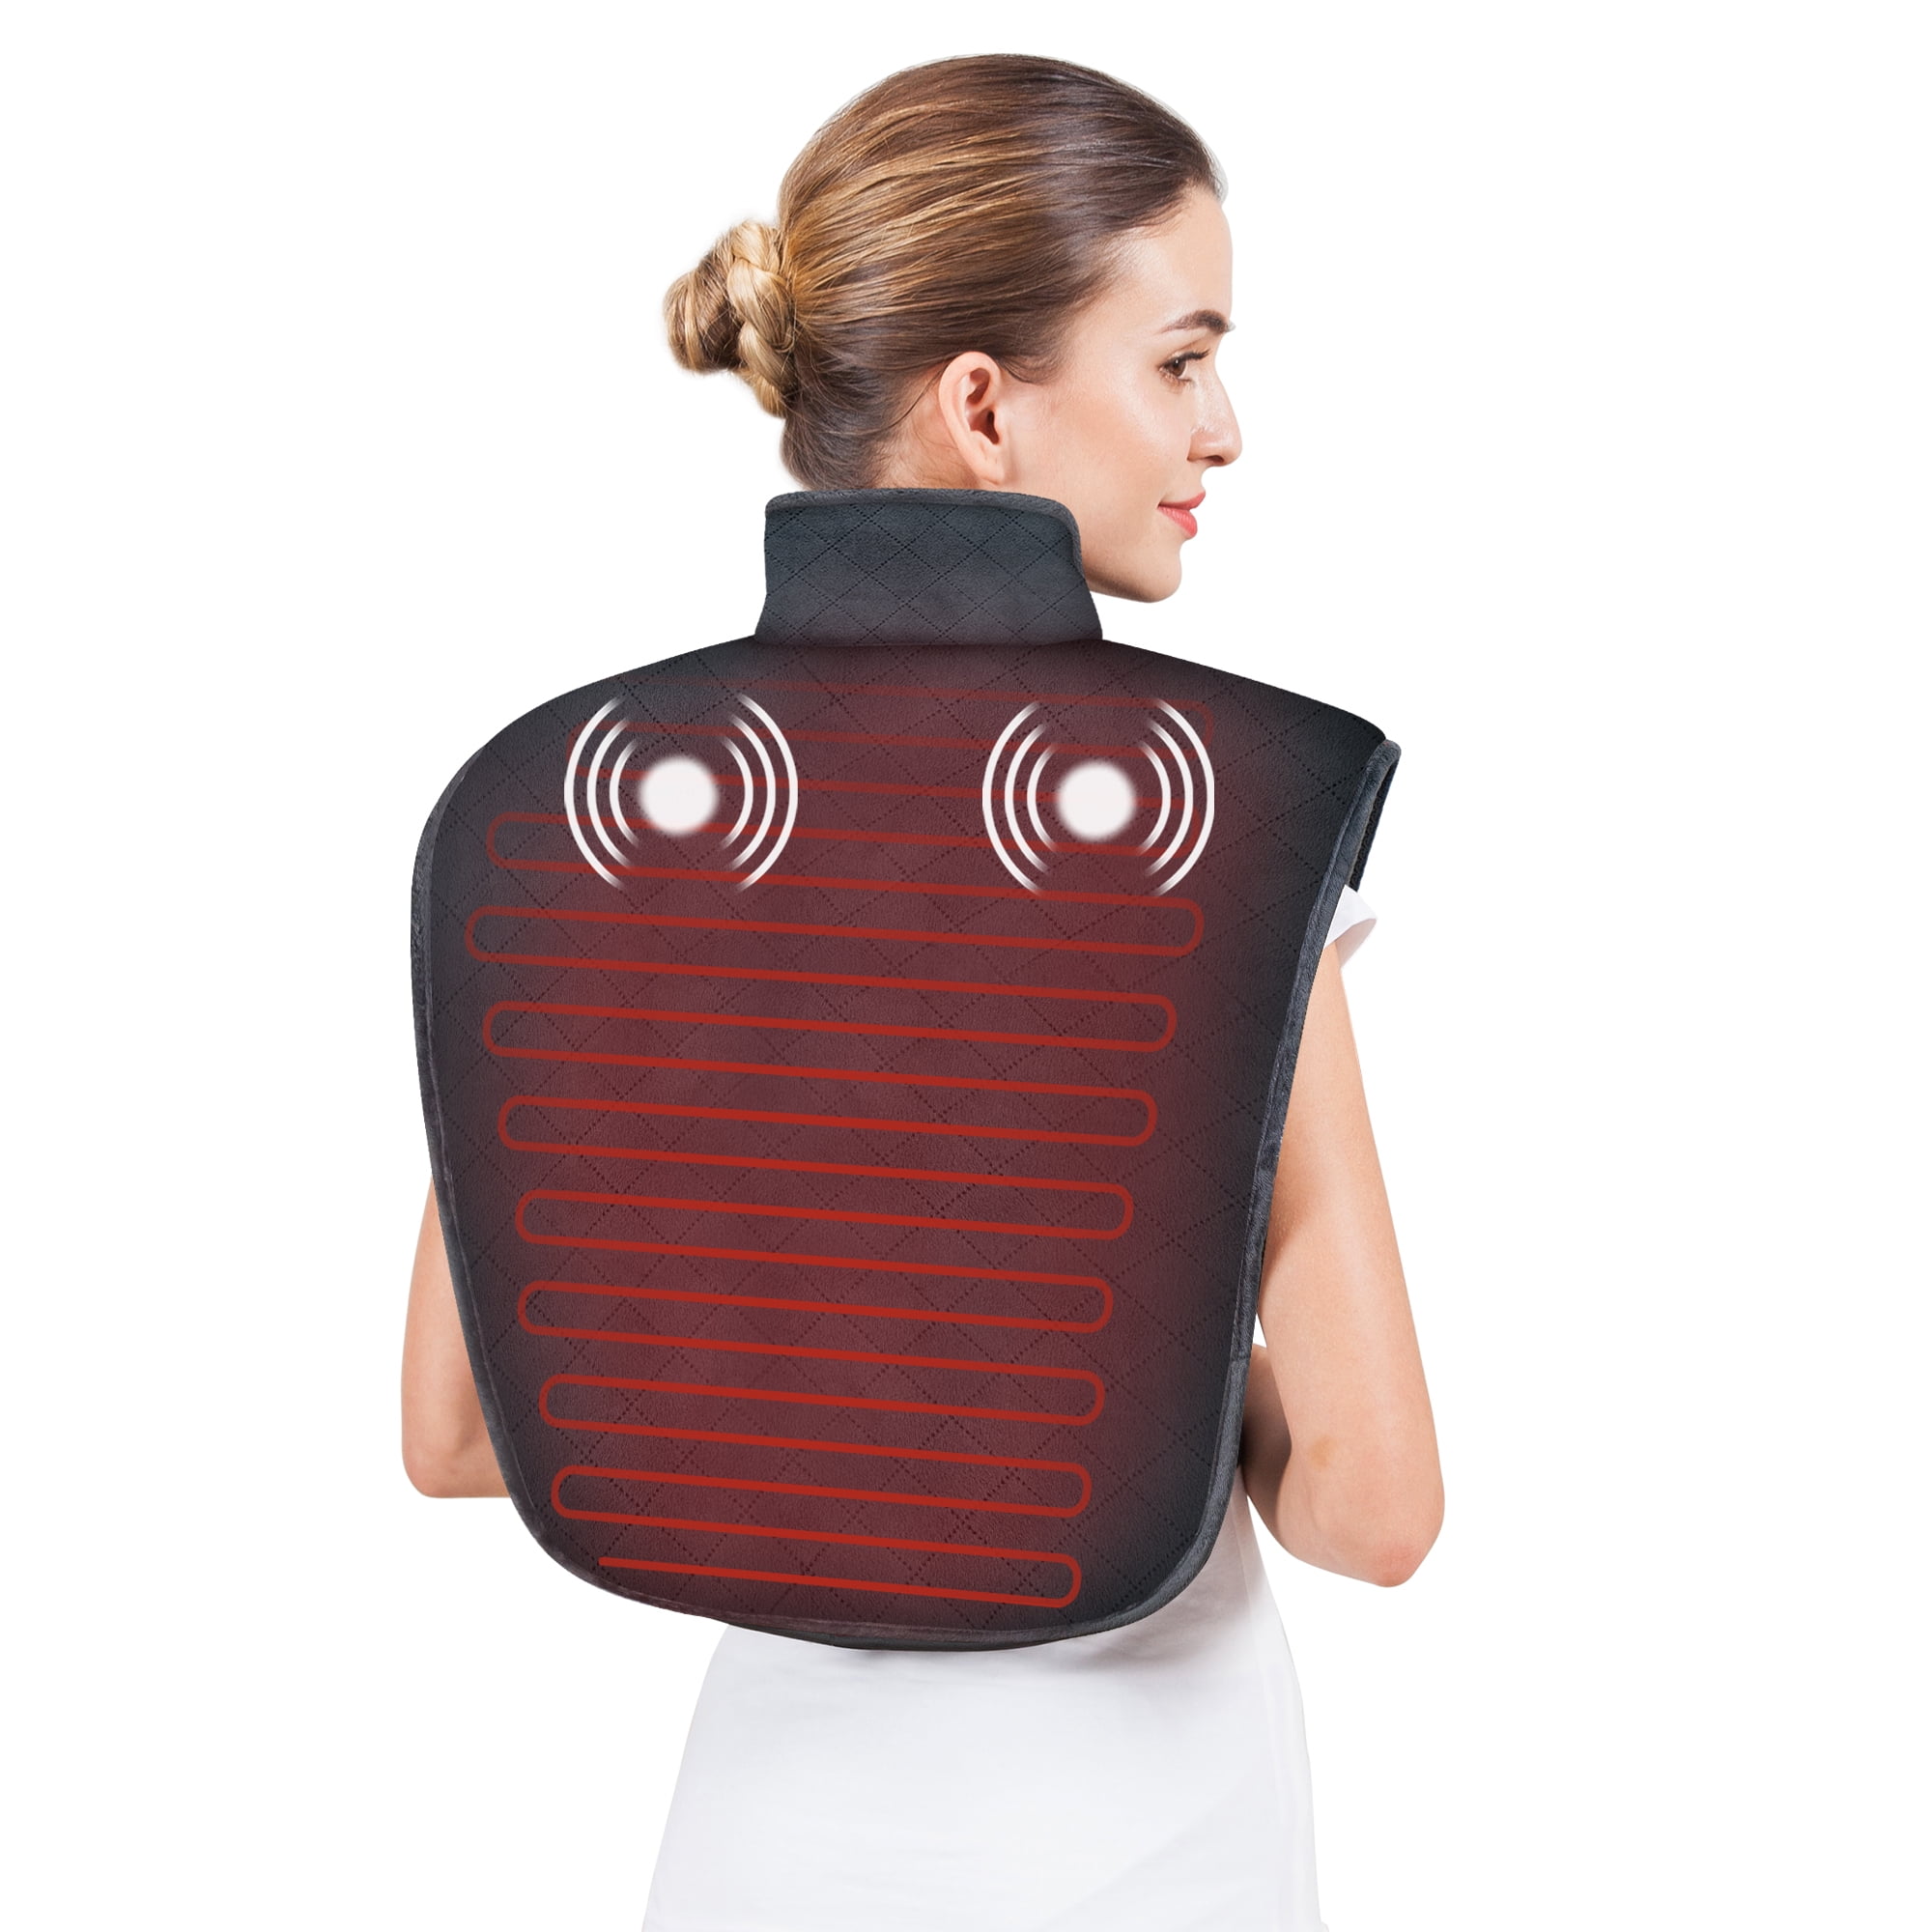 Snailax Heated Neck and Shoulder Massager, Electric Heating Pad